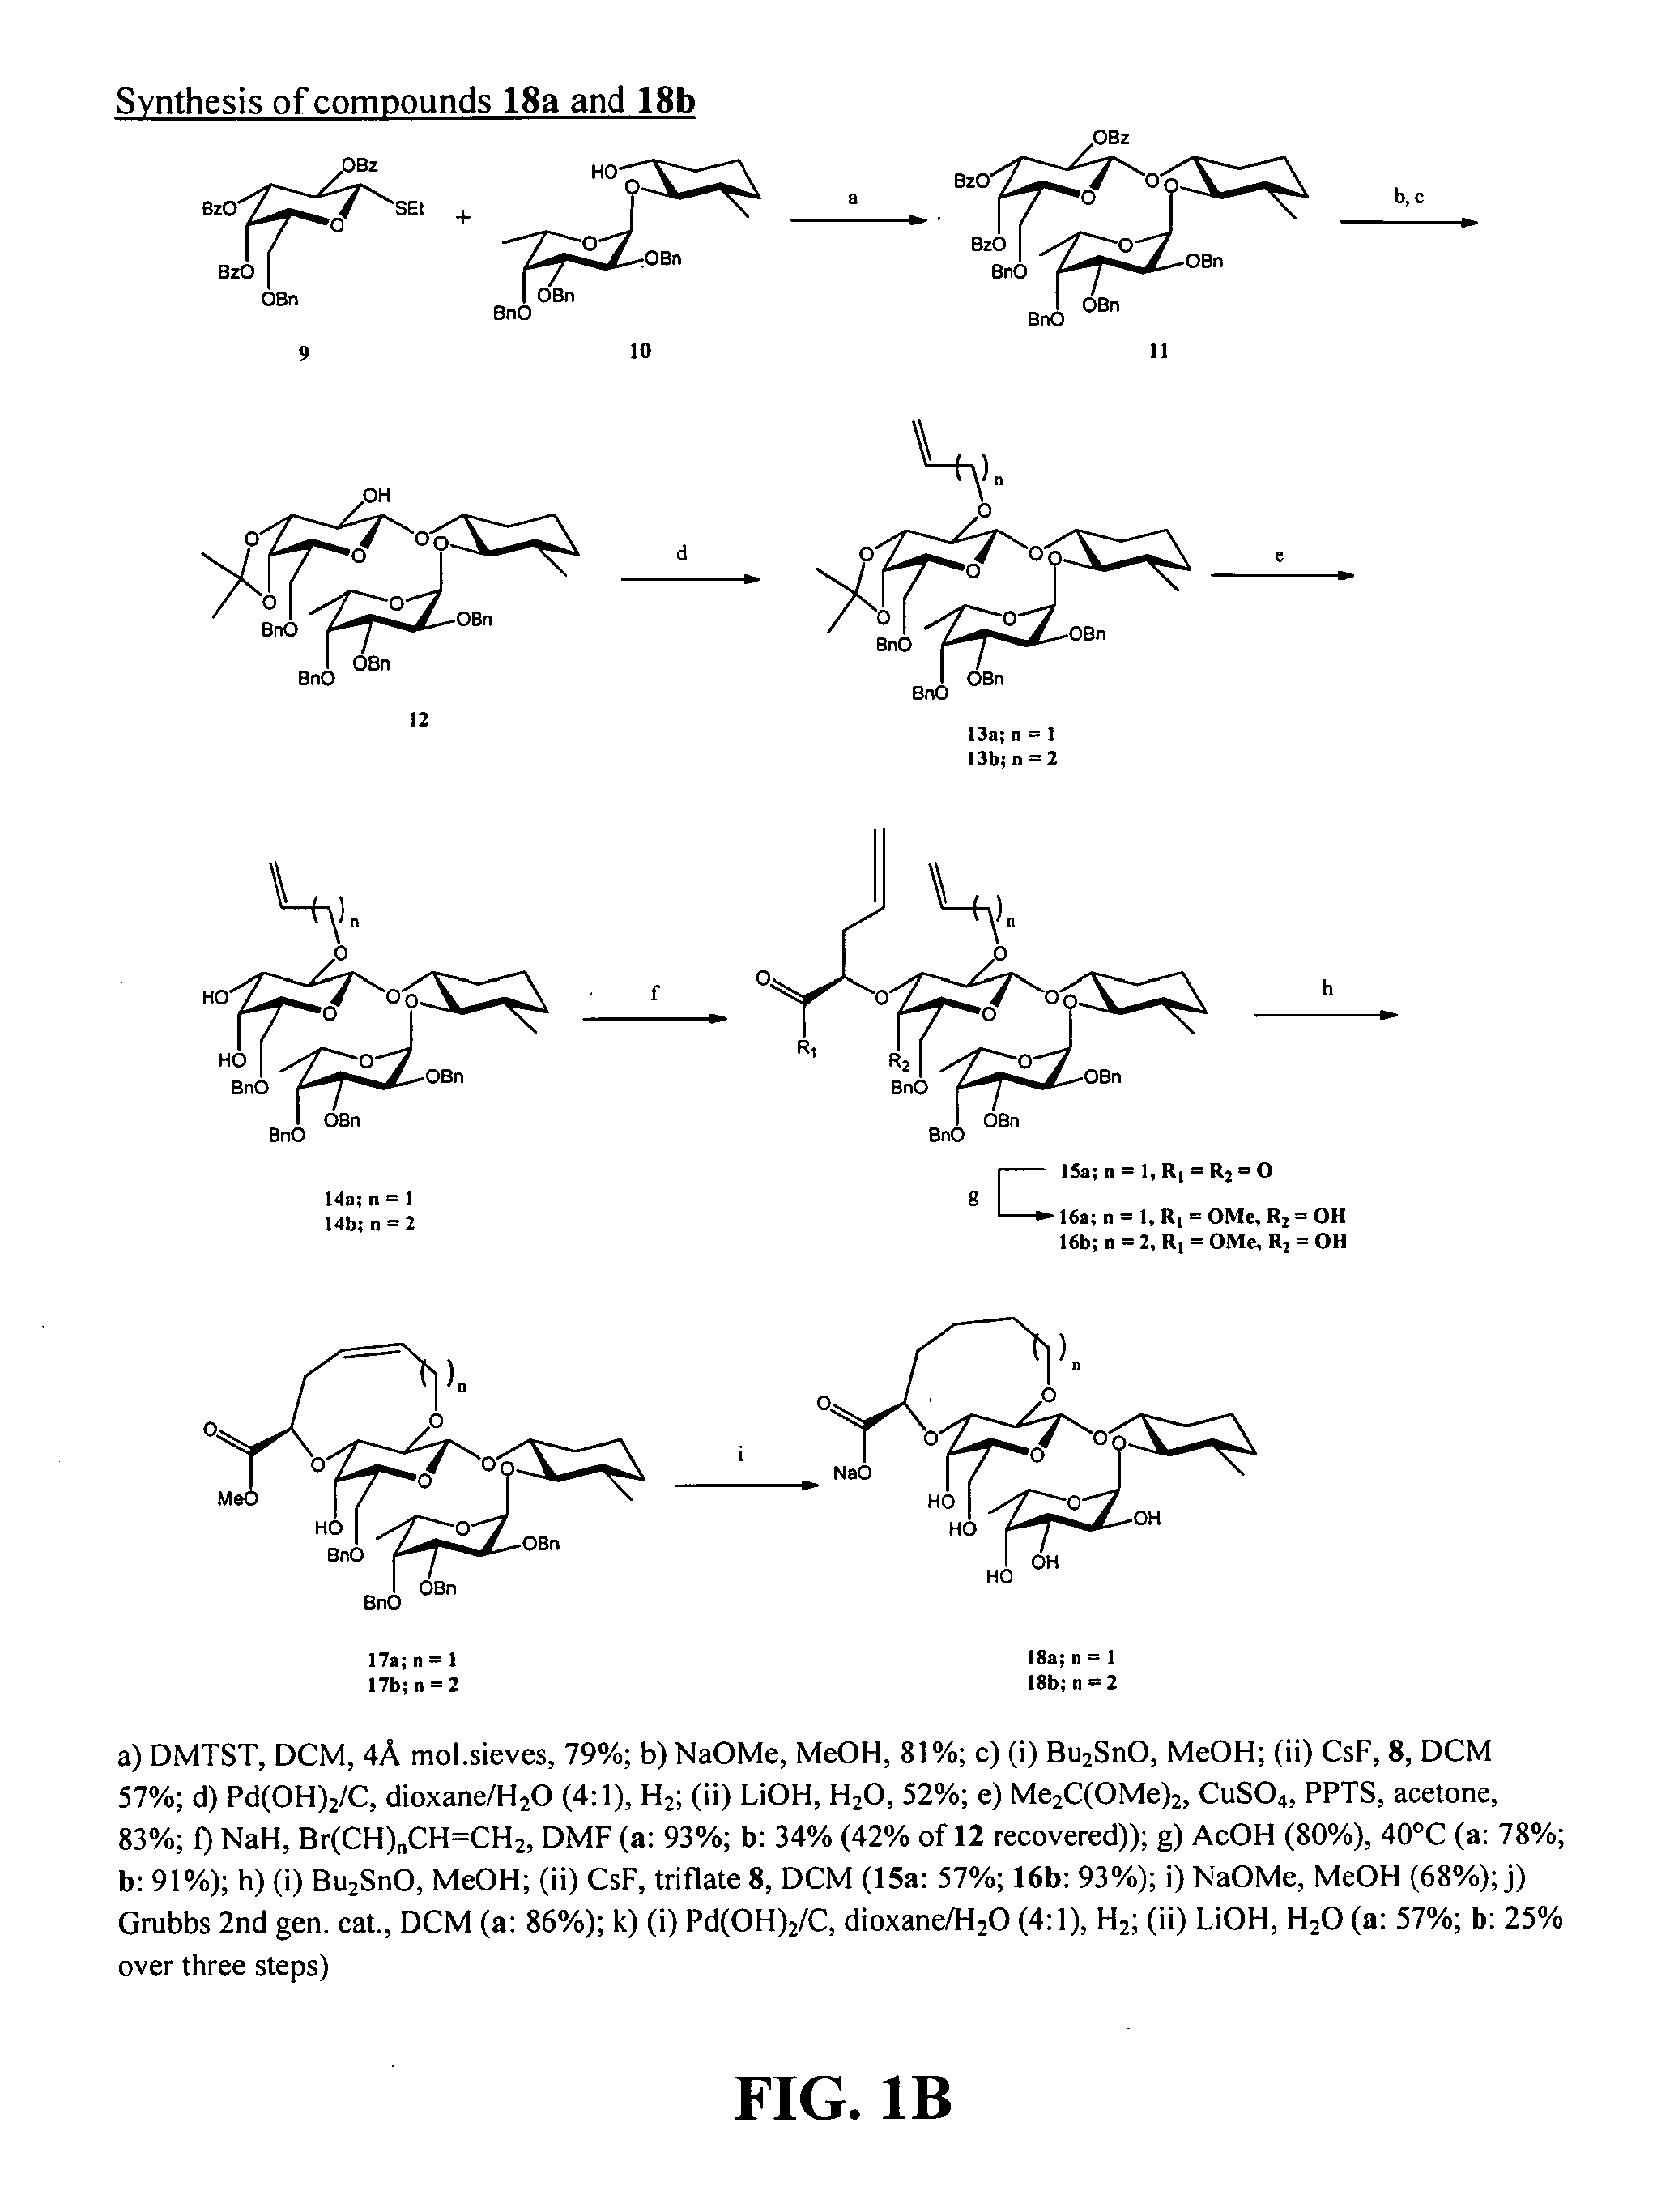 E-Selectin Antagonists Modified By Macrocycle Formation to the Galactose